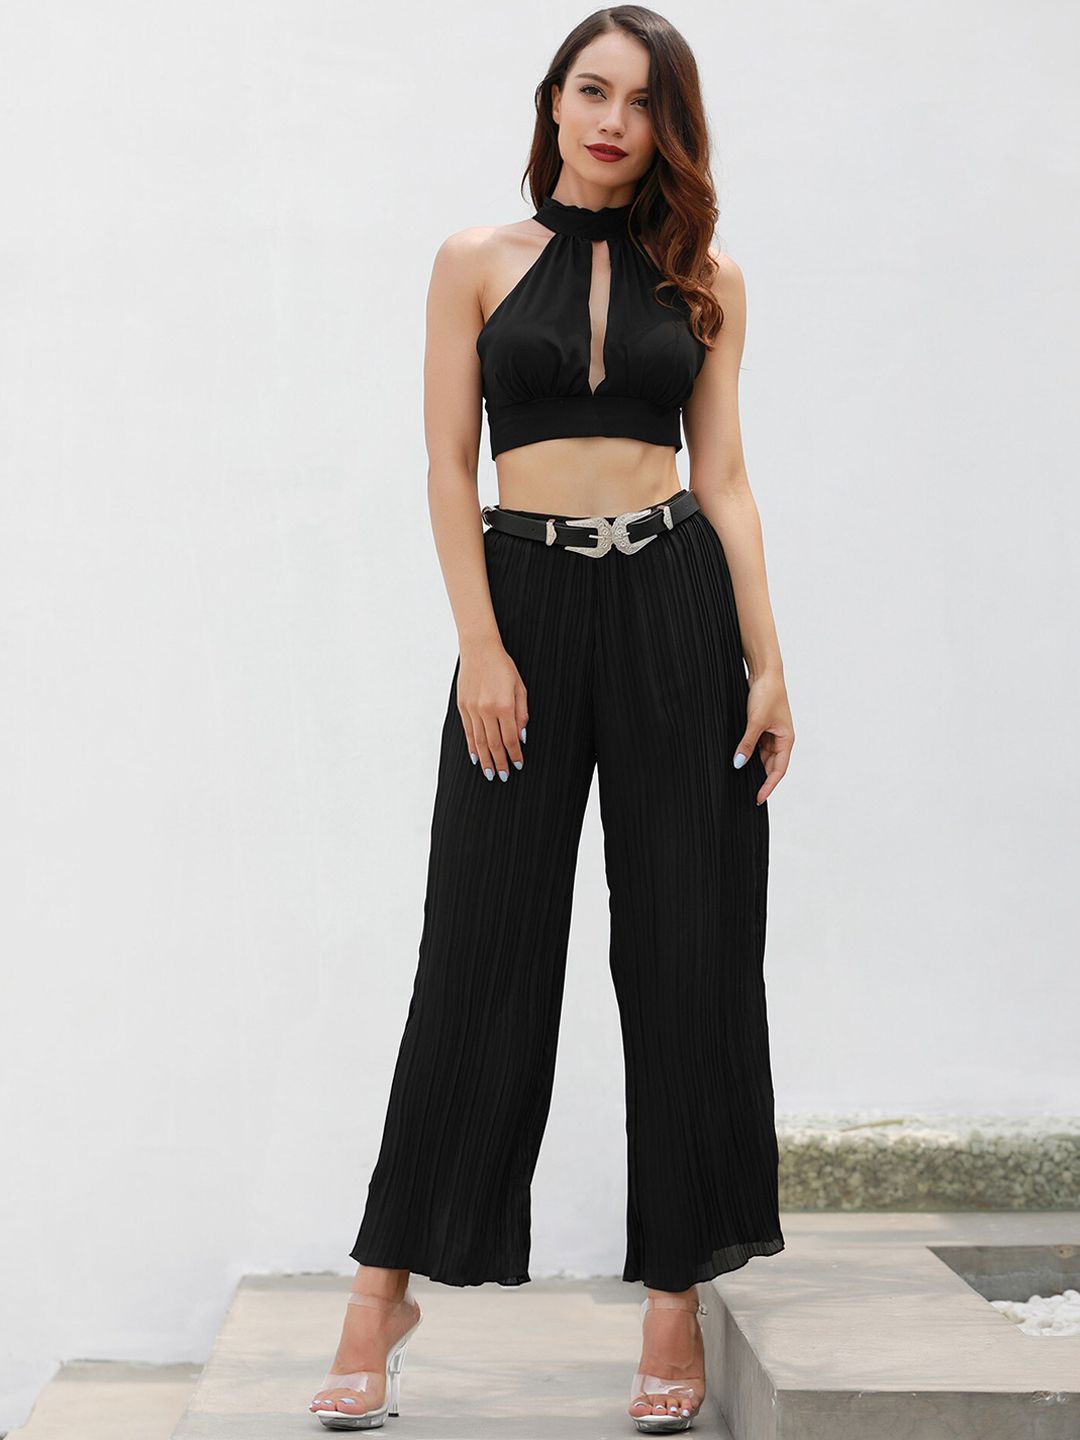 BoStreet Women Black Loose Fit Trousers Price in India